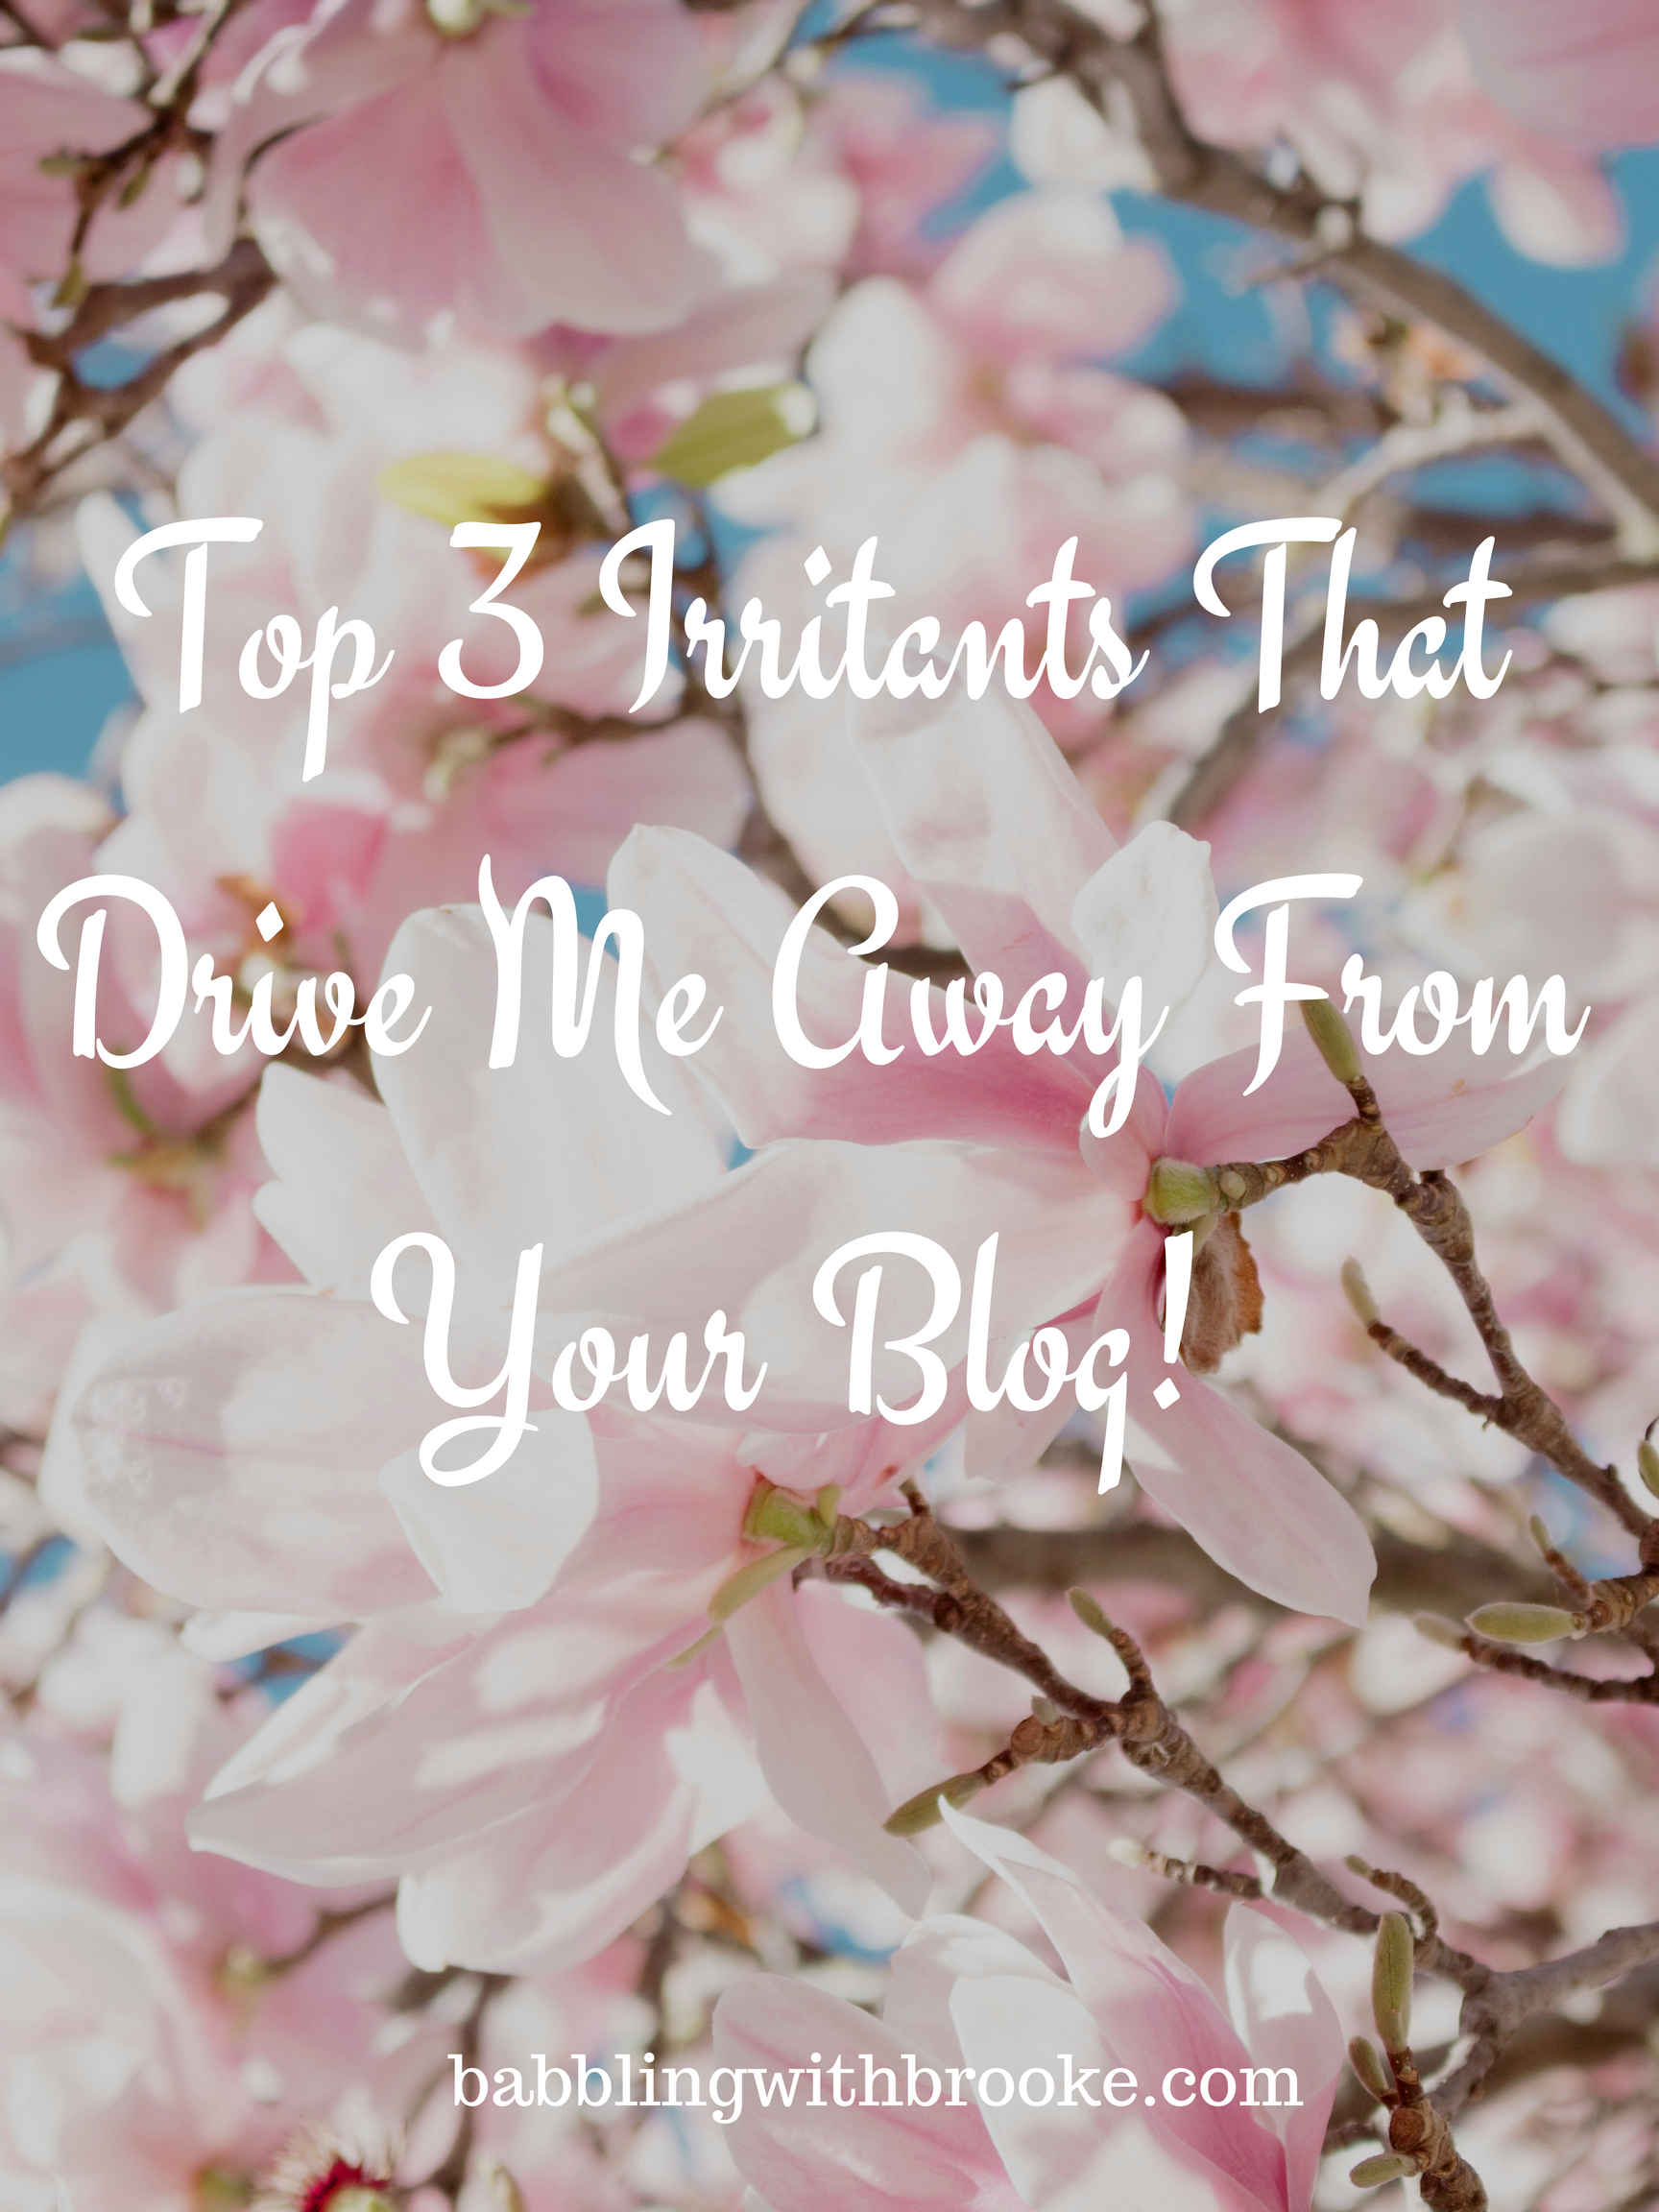 Top 3 Irritants That Drive Me Away From Your Blog!